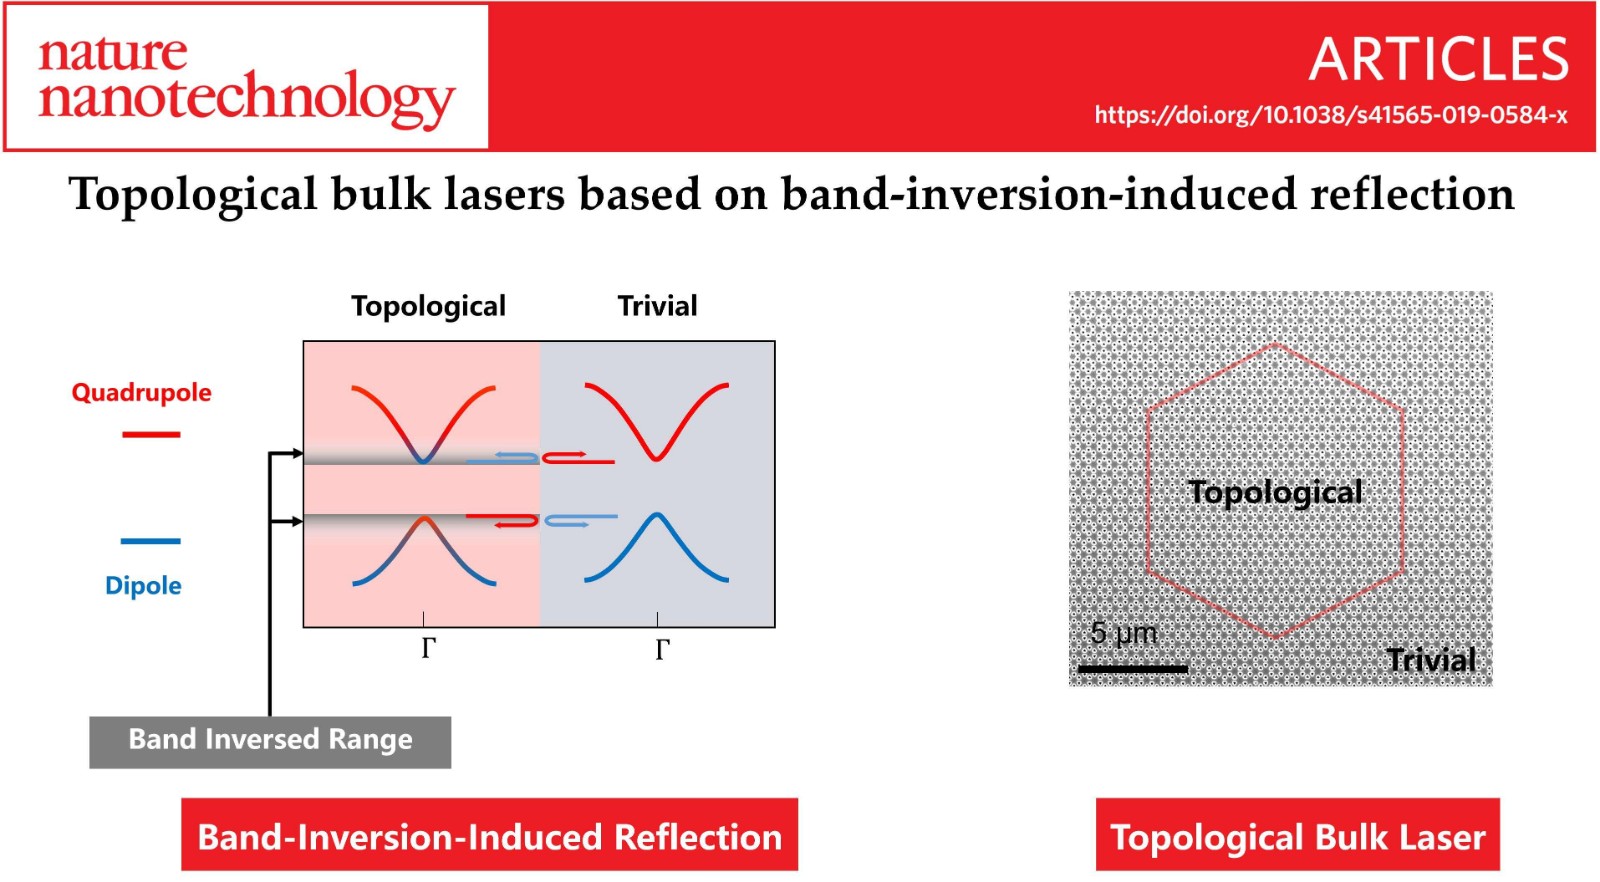 Topological bulk lasers based on band-inversion-induced reflection